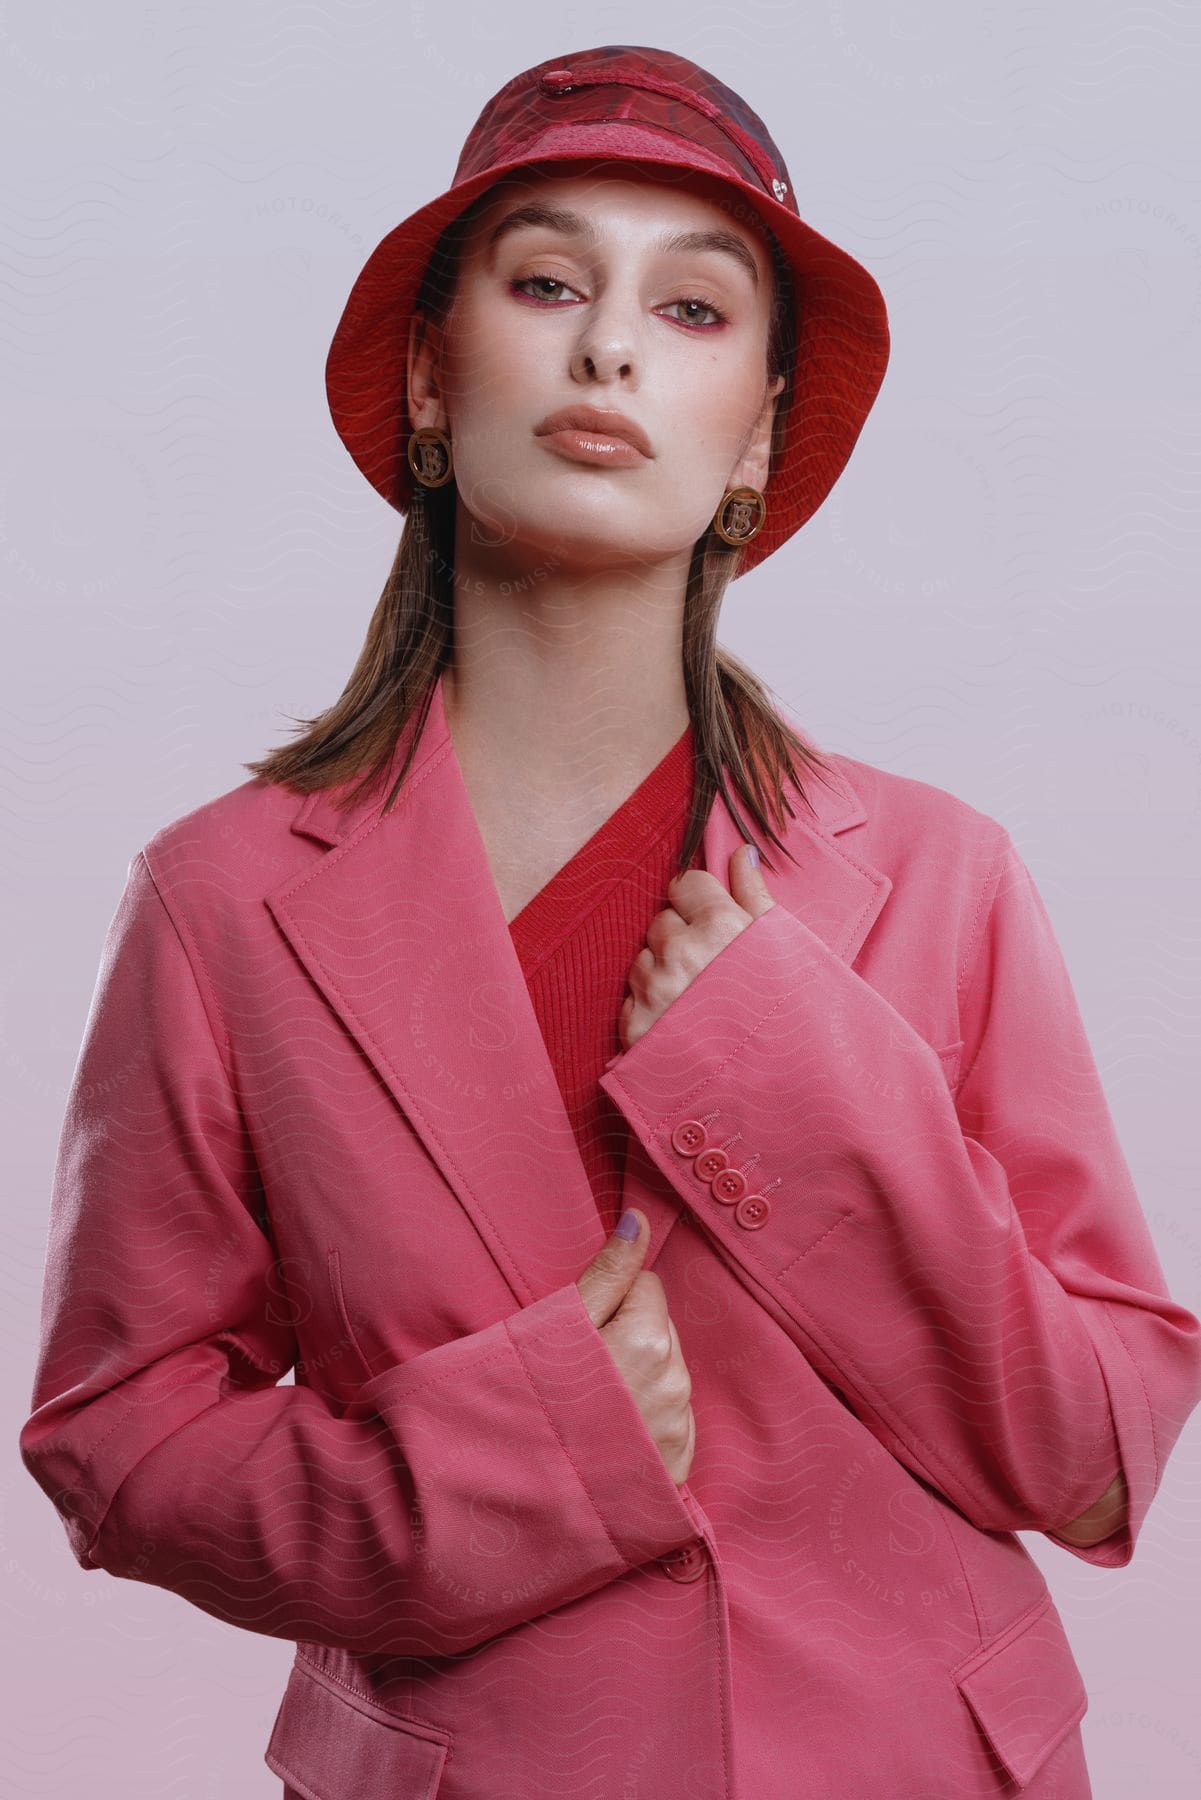 A women is posing in a pink blazer and pink makeup on.